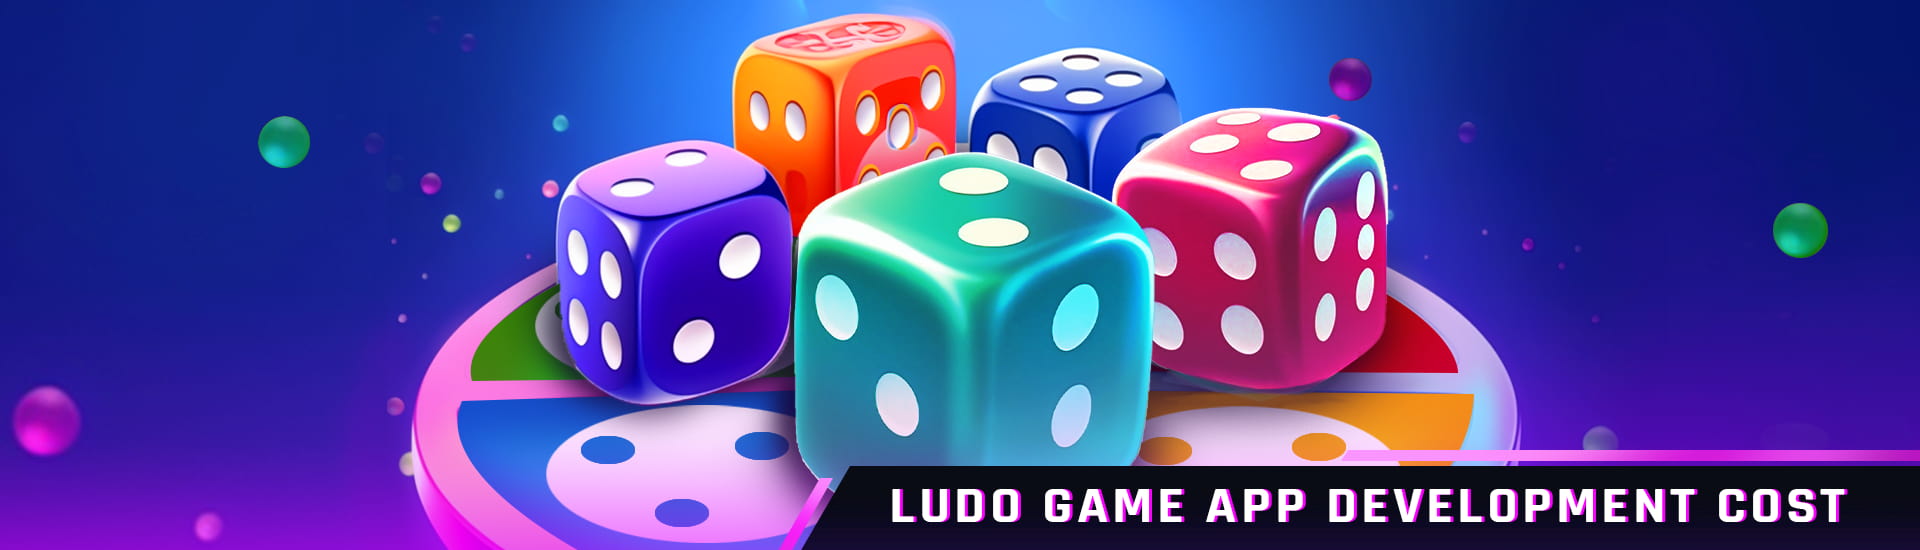 A Guide to Ludo games online - Big Cash